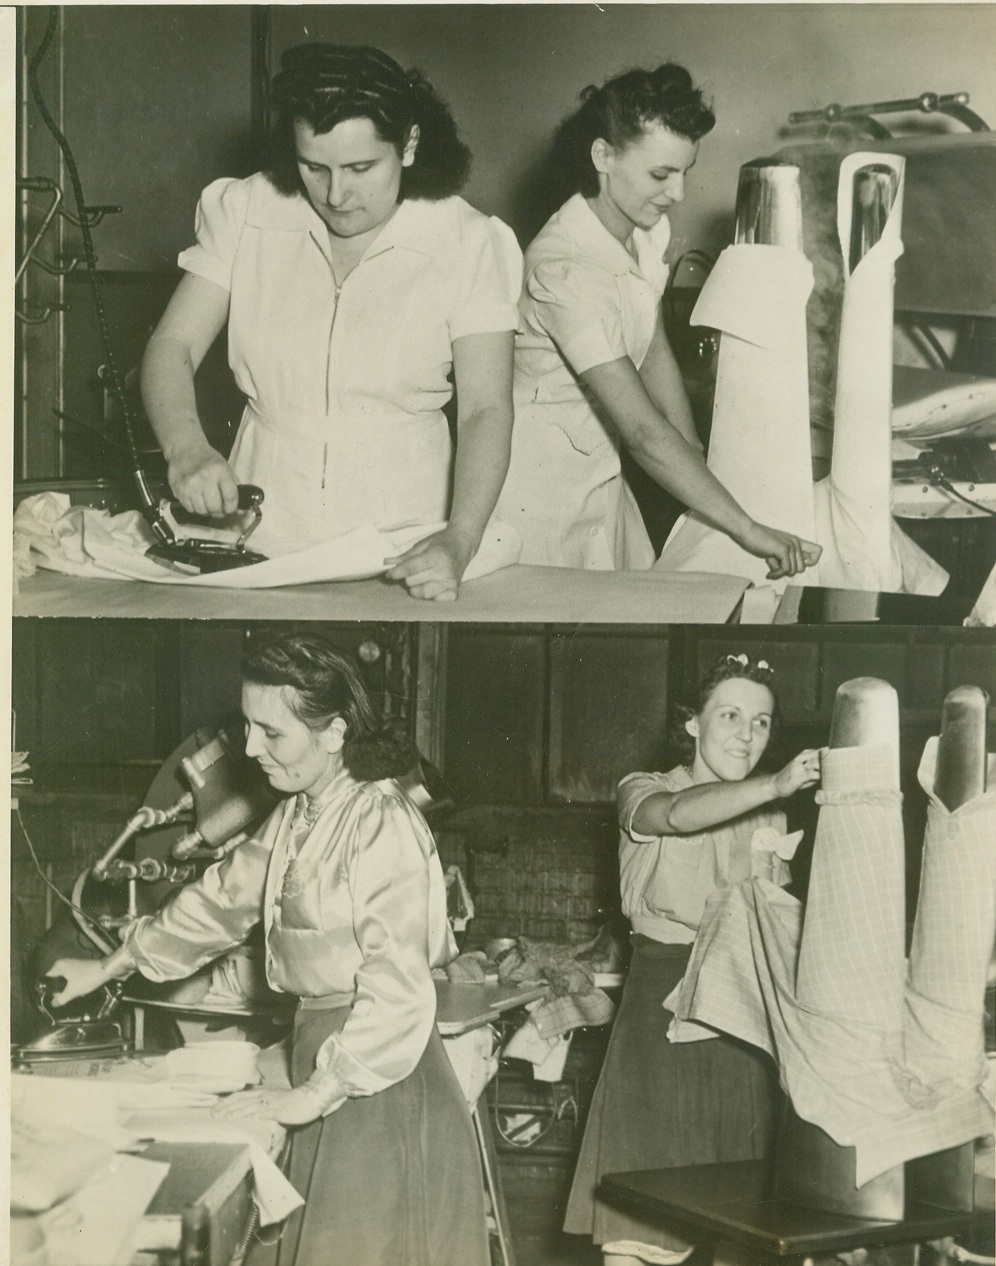 TO STAGE SHIRT-IRONING CONTEST, 1/10/41  CLEVELAND, O.- Two teams of two women each from two laundries here will vie for shirt-ironing honors. The women, using latest equipment instead of traditional flat iron, will see who can turn out the greatest number of men’s shirts in an hour. In top photo Miss Julia Metro, left, and Mrs. Mary Tackas will represent The Rapid Three Hour Laundry. Below Miss Julie Bradia, left, and Miss Mary Varovac will uphold hone of New Method Laundry. Credit: OWI Radiophoto from ACME;